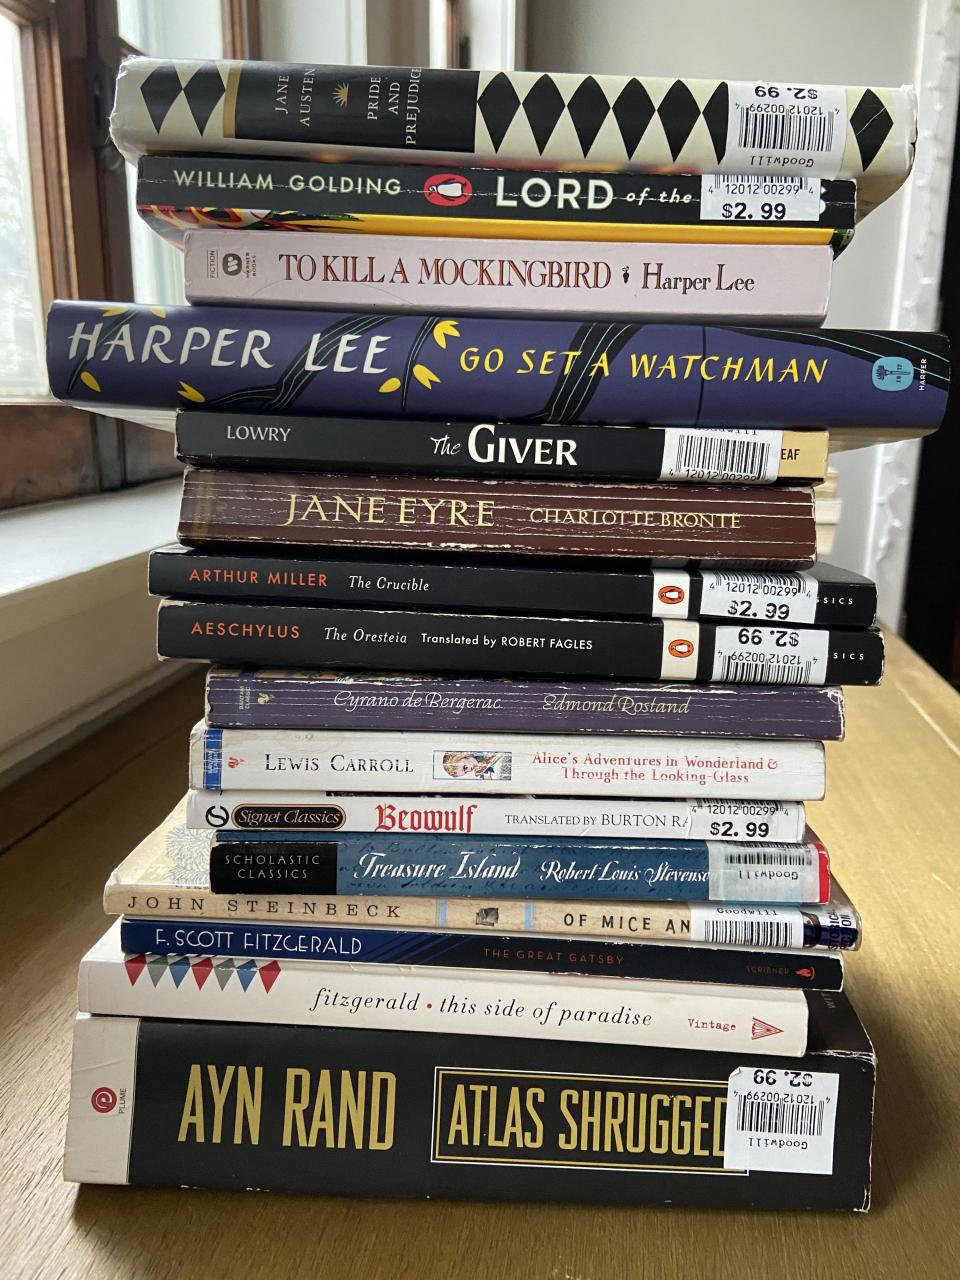 photo of a stack of books including titles "Atlas Shrugged," "This Side of Paradise," "Of Mice and Men," "Treasure Island," and "Beowulf"